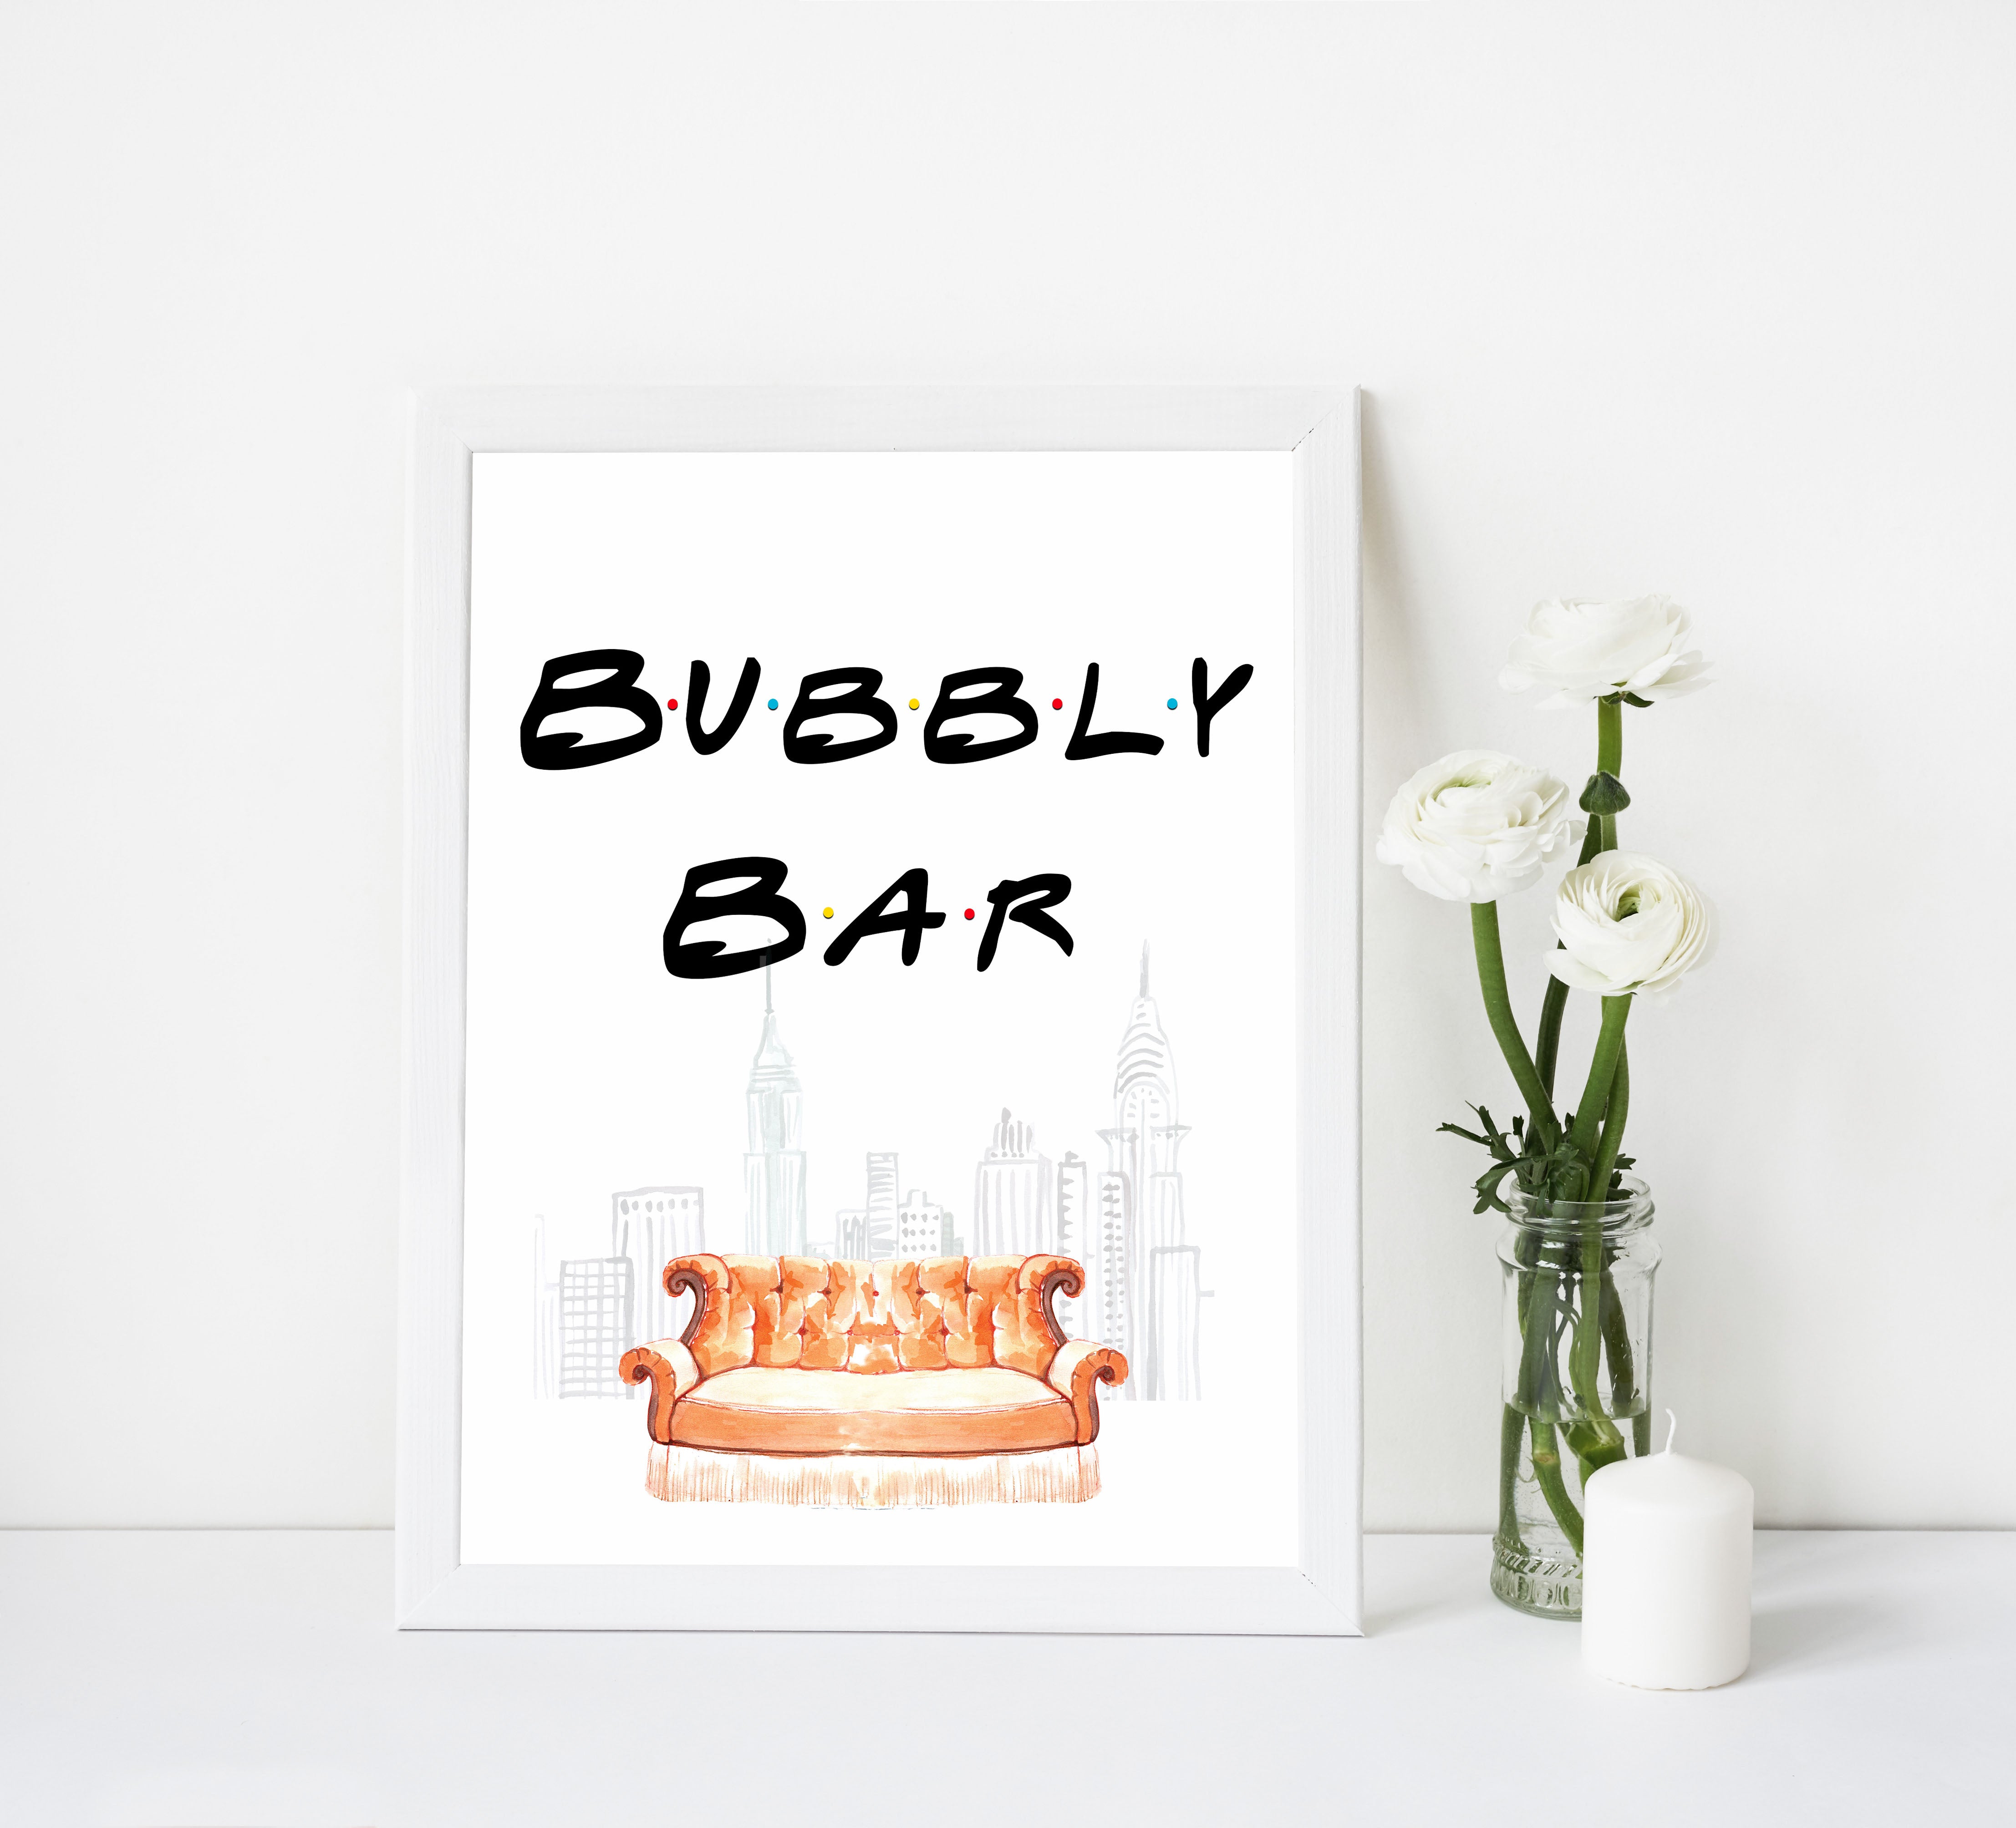 bubbly bar table sign, Printable bridal shower signs, friends bridal shower decor, friends bridal shower decor ideas, fun bridal shower decor, bridal shower game ideas, friends bridal shower ideas